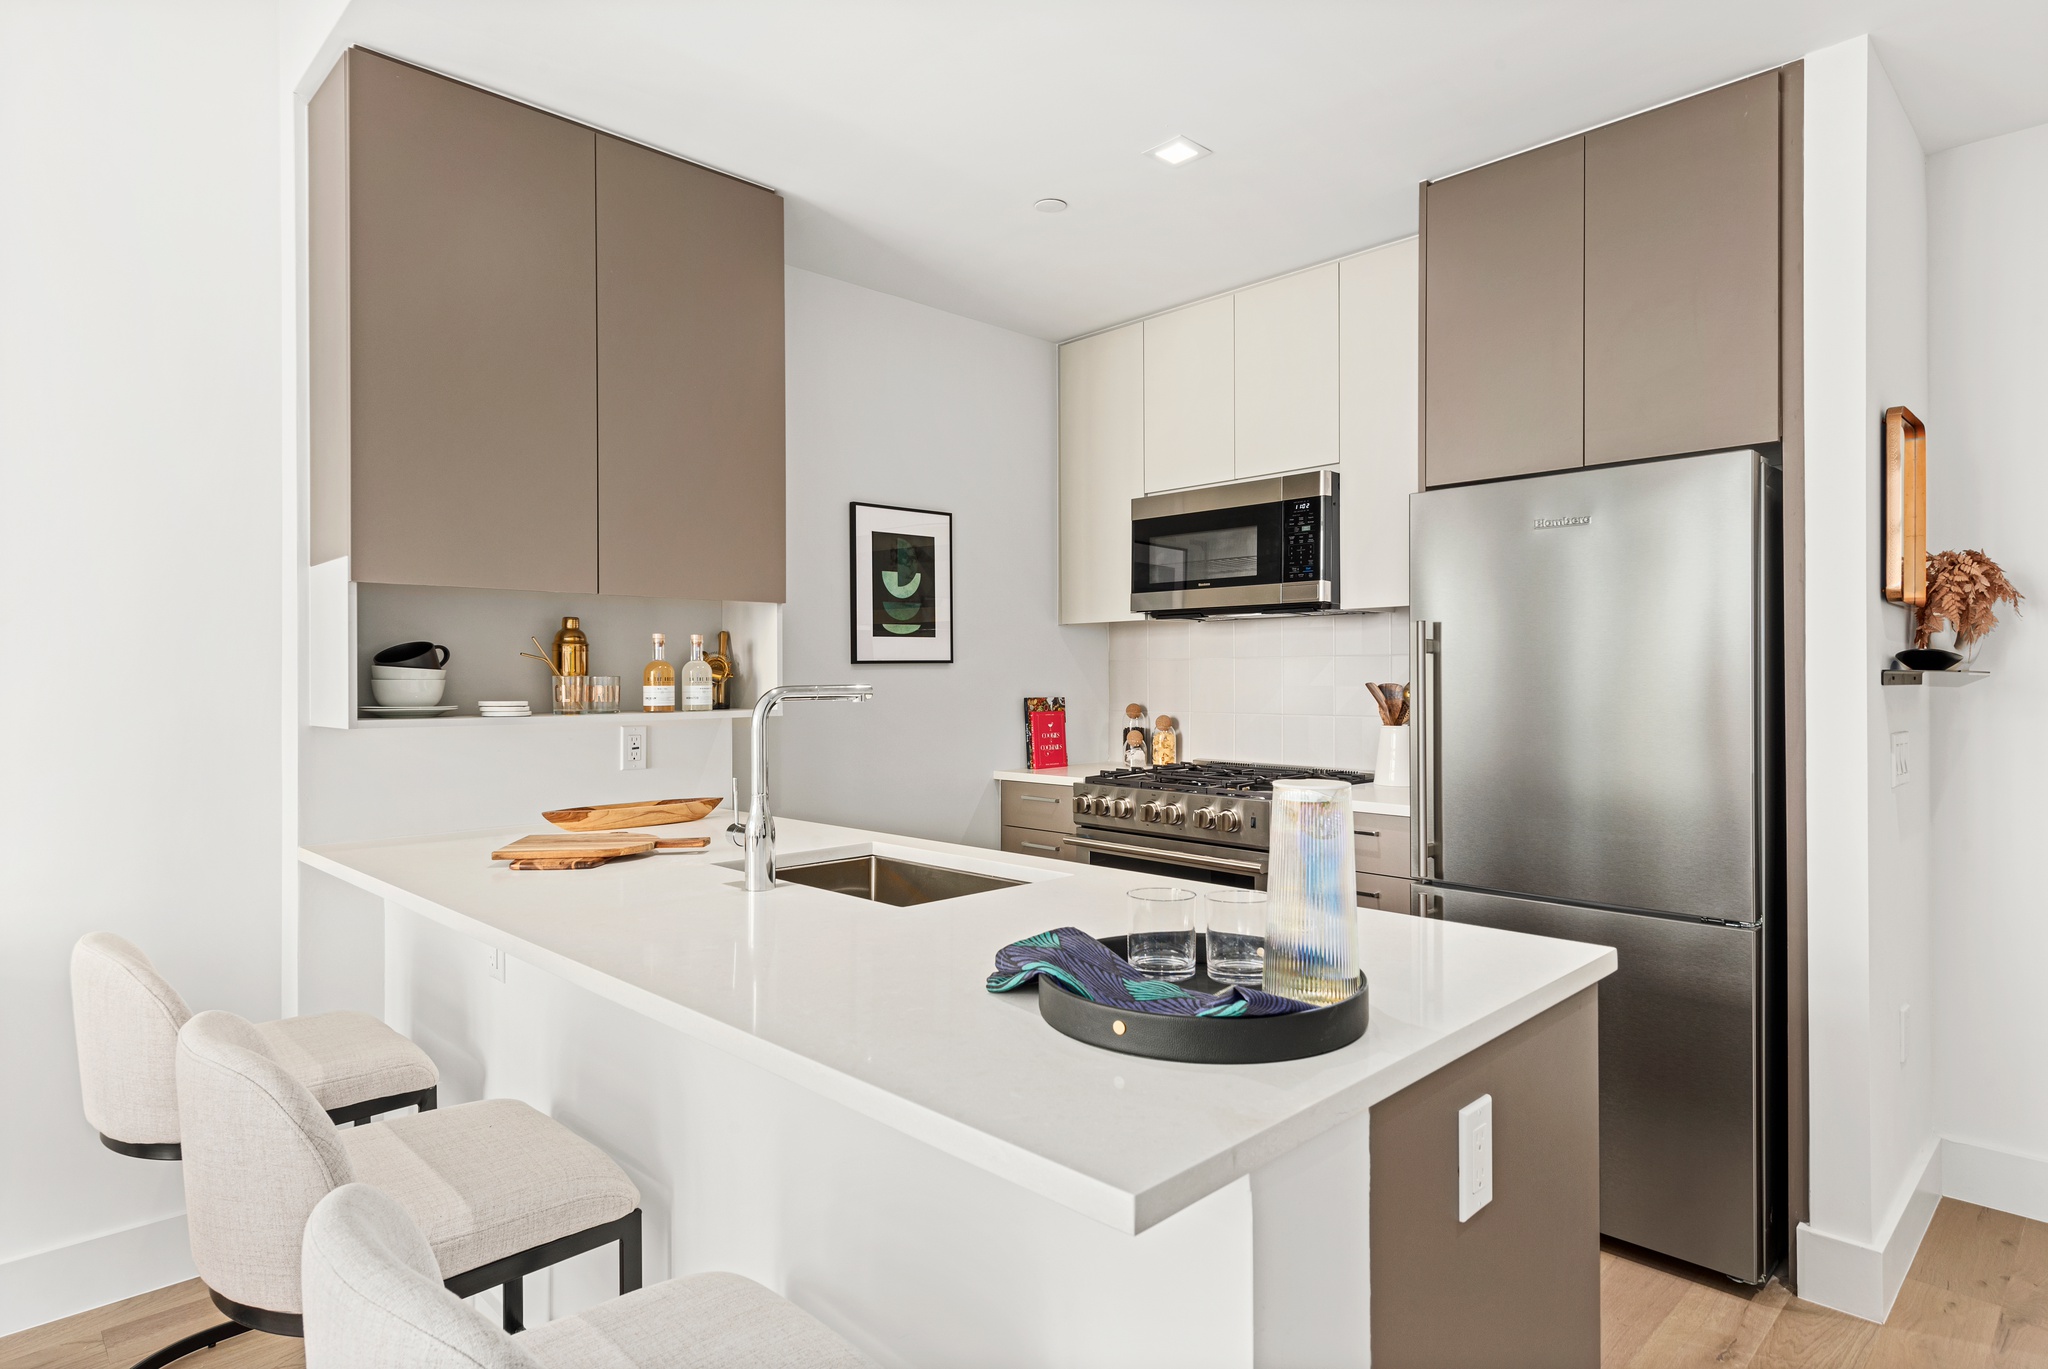 Modern kitchen with light grey and tan cabinetry, white counters, stainless steel applicances, wood floor and counter seating with white and black bar stools